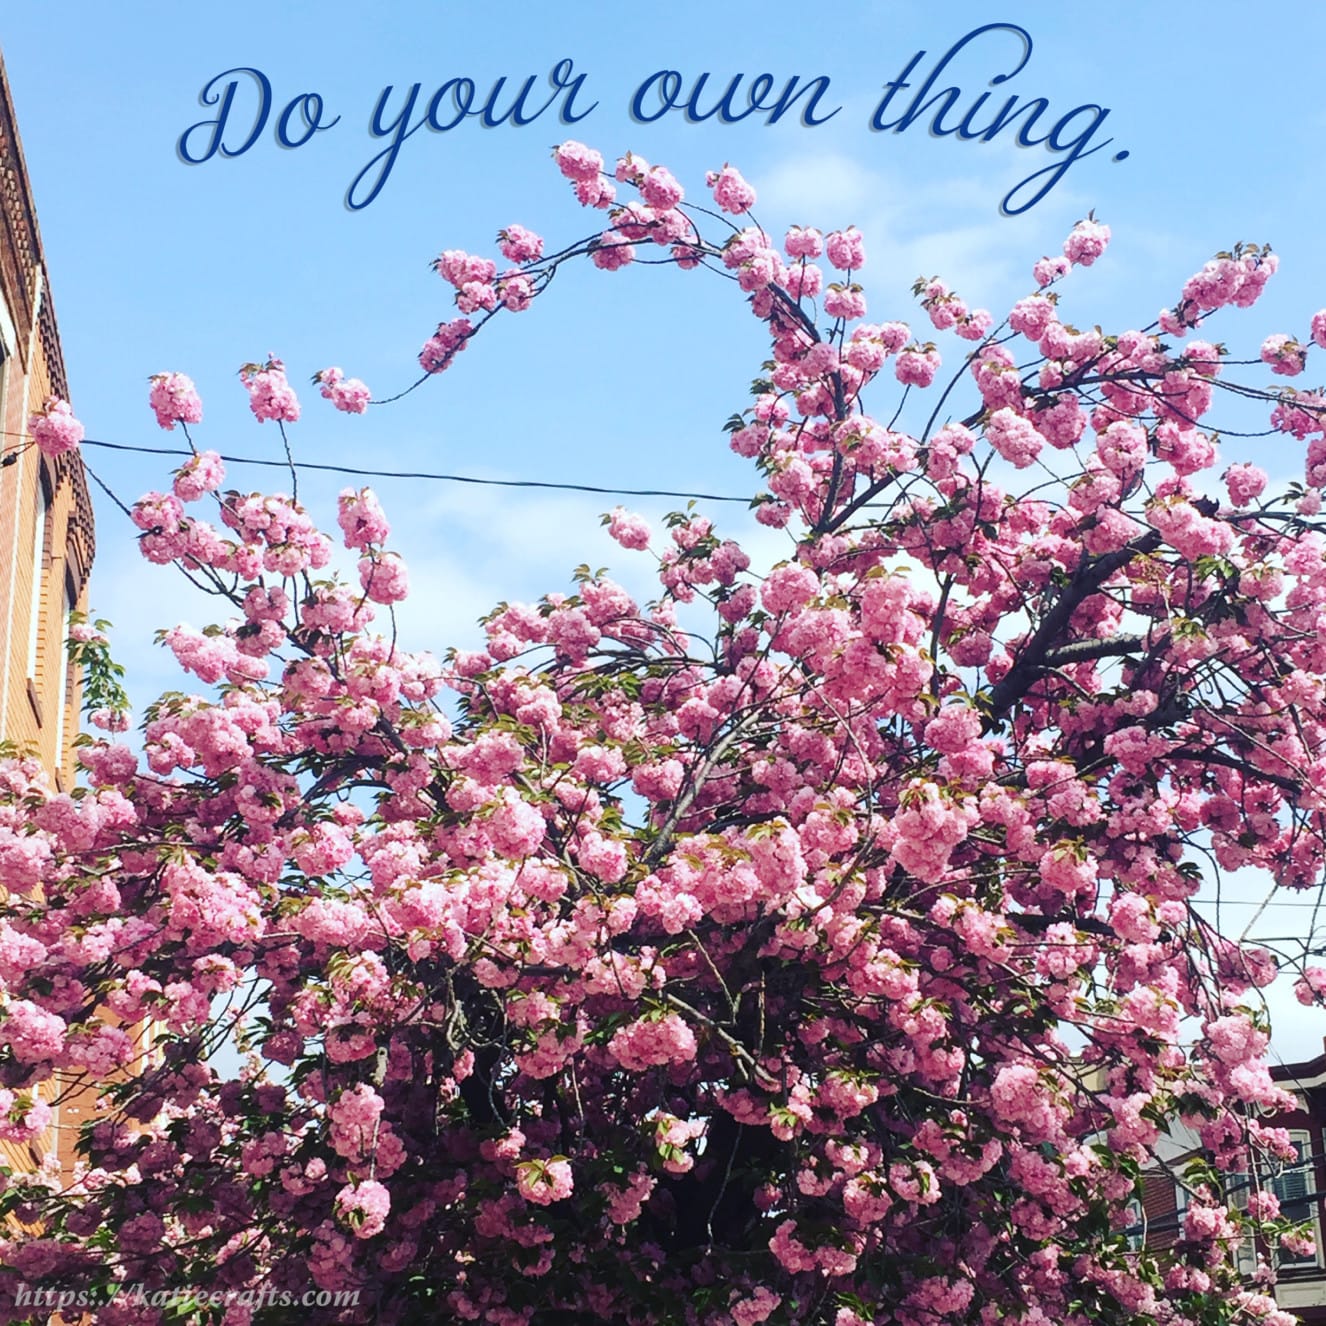 Motivation Monday: Do Your Own Thing on Katie Crafts; https://www.katiecrafts.com